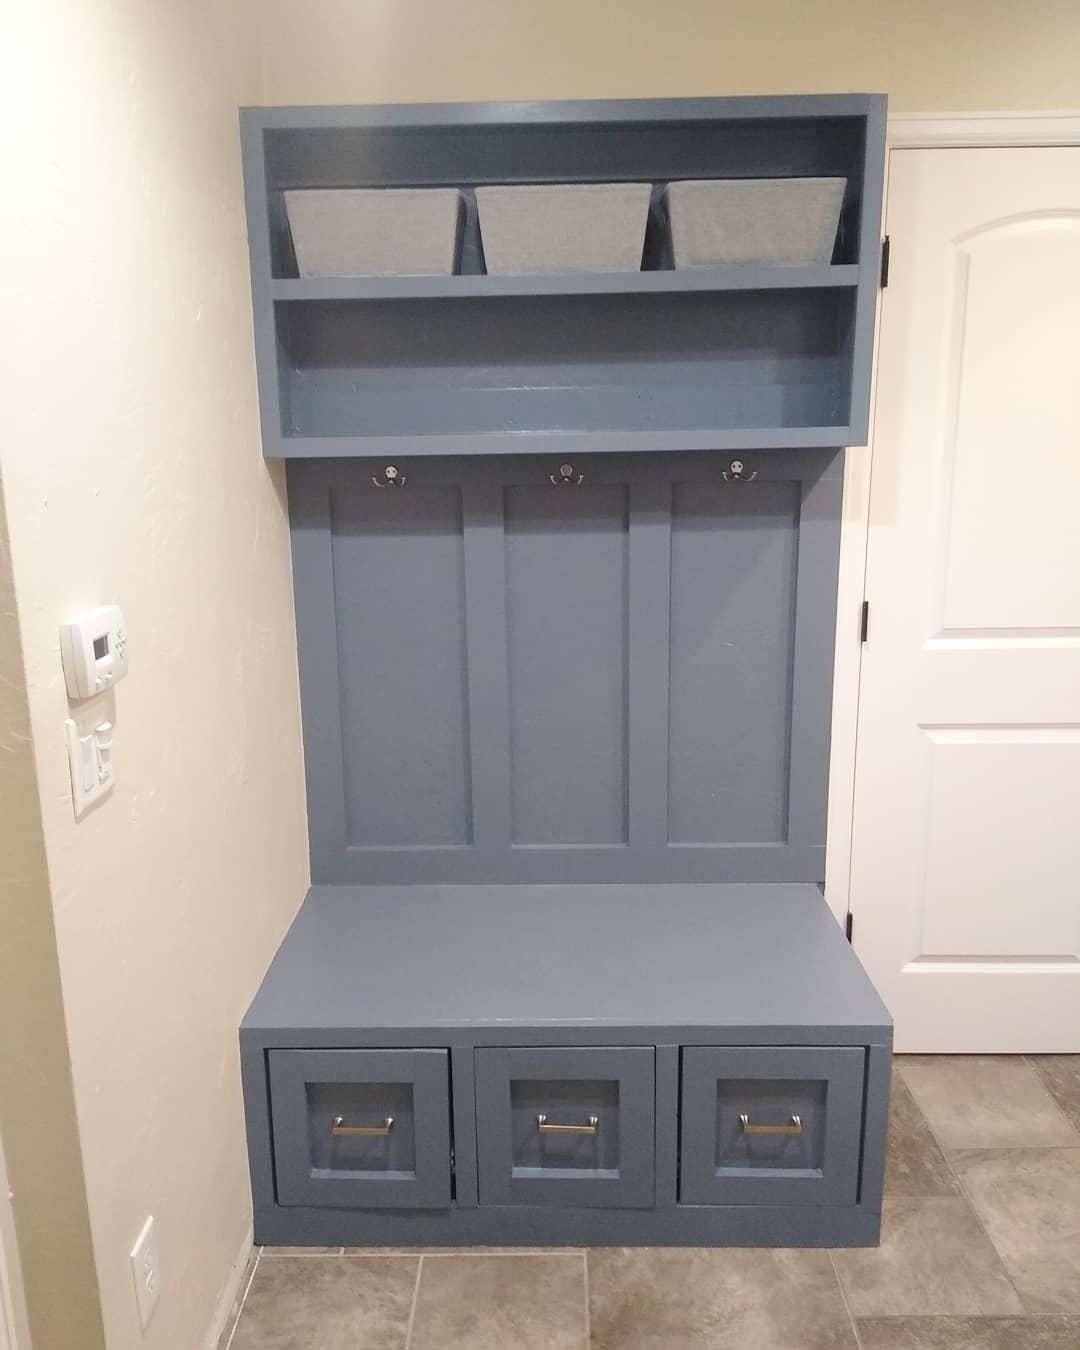 Sherwin Williams Charcoal Blue SW 2739: Color Review